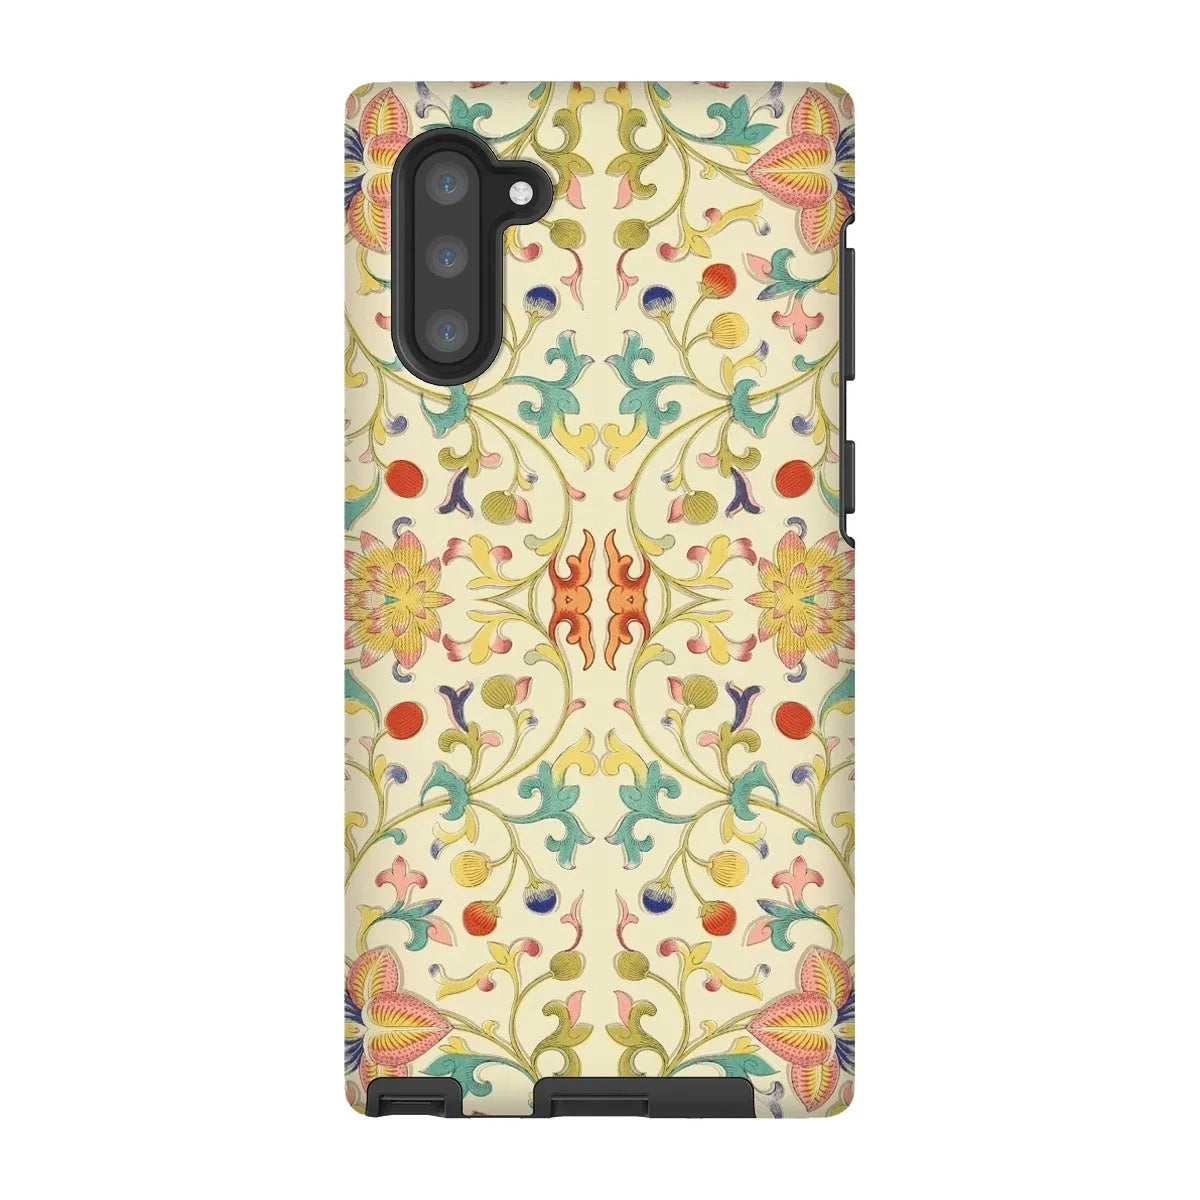 Over The Rainbow - Chinoiserie Pattern Art Phone Case - Samsung Galaxy Note 10 / Matte - Mobile Phone Cases - Aesthetic